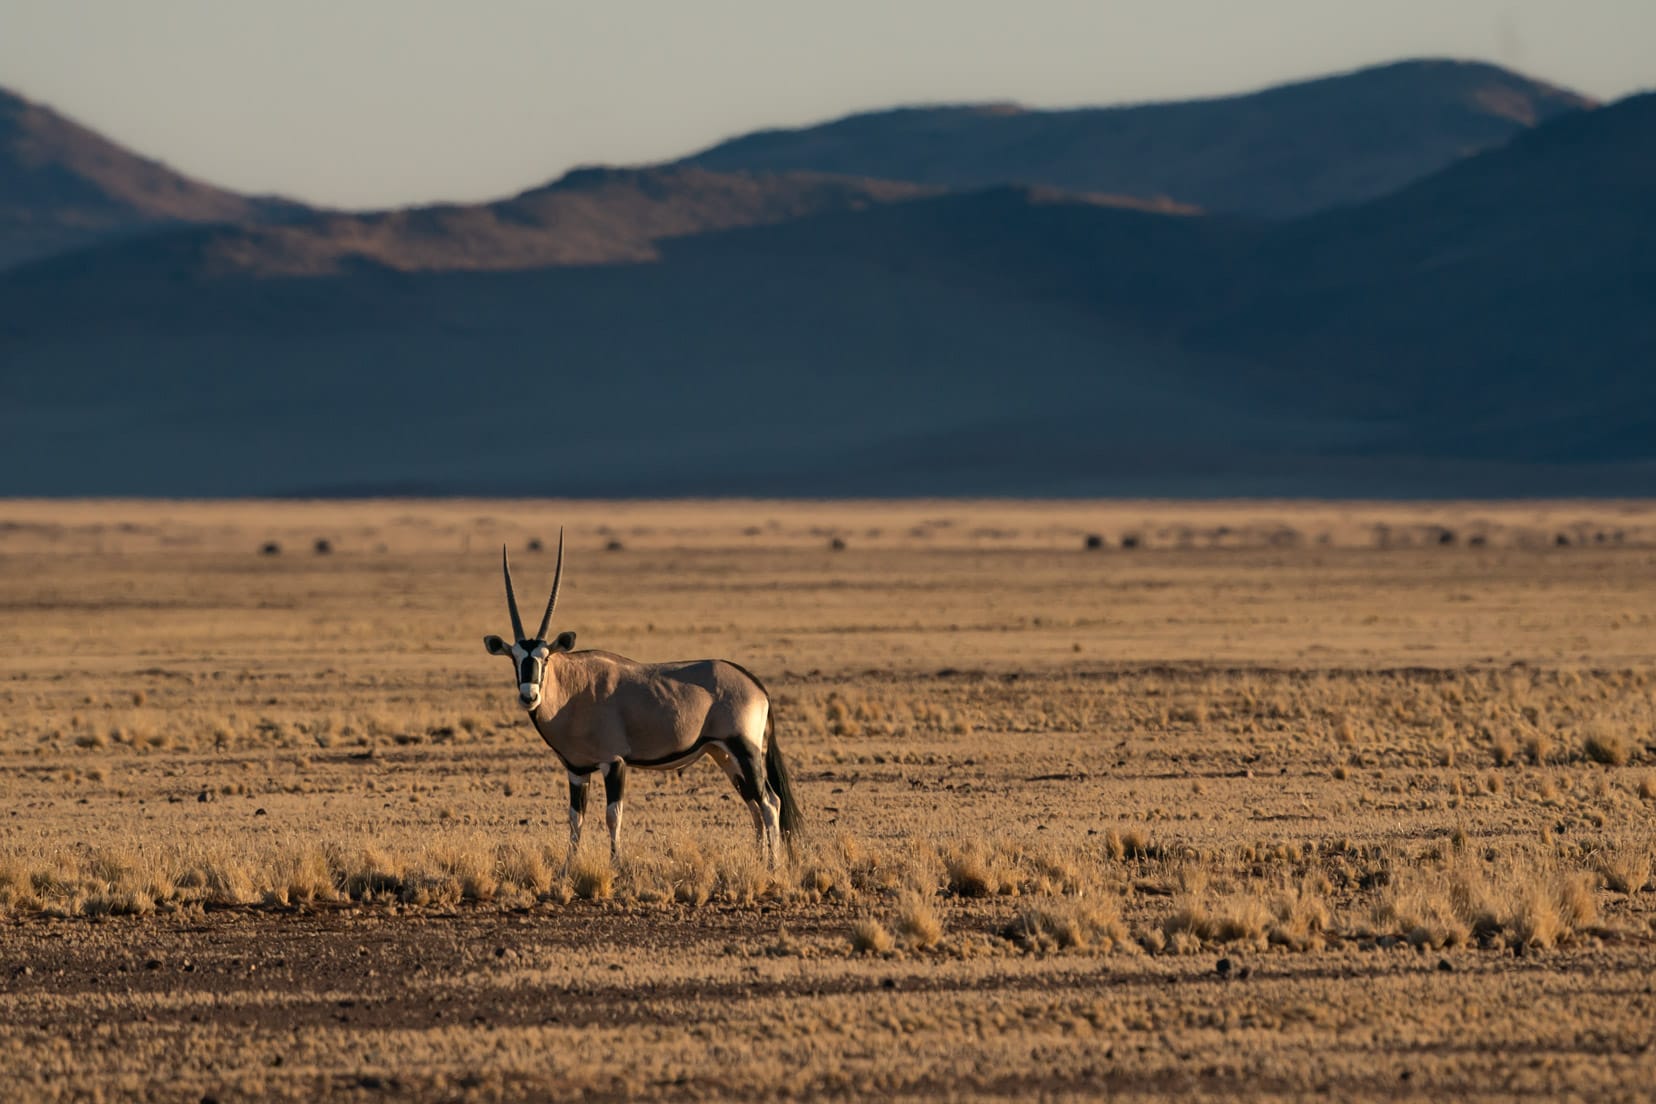 Oryx in the setting sun light with Tiras Mountains in the background